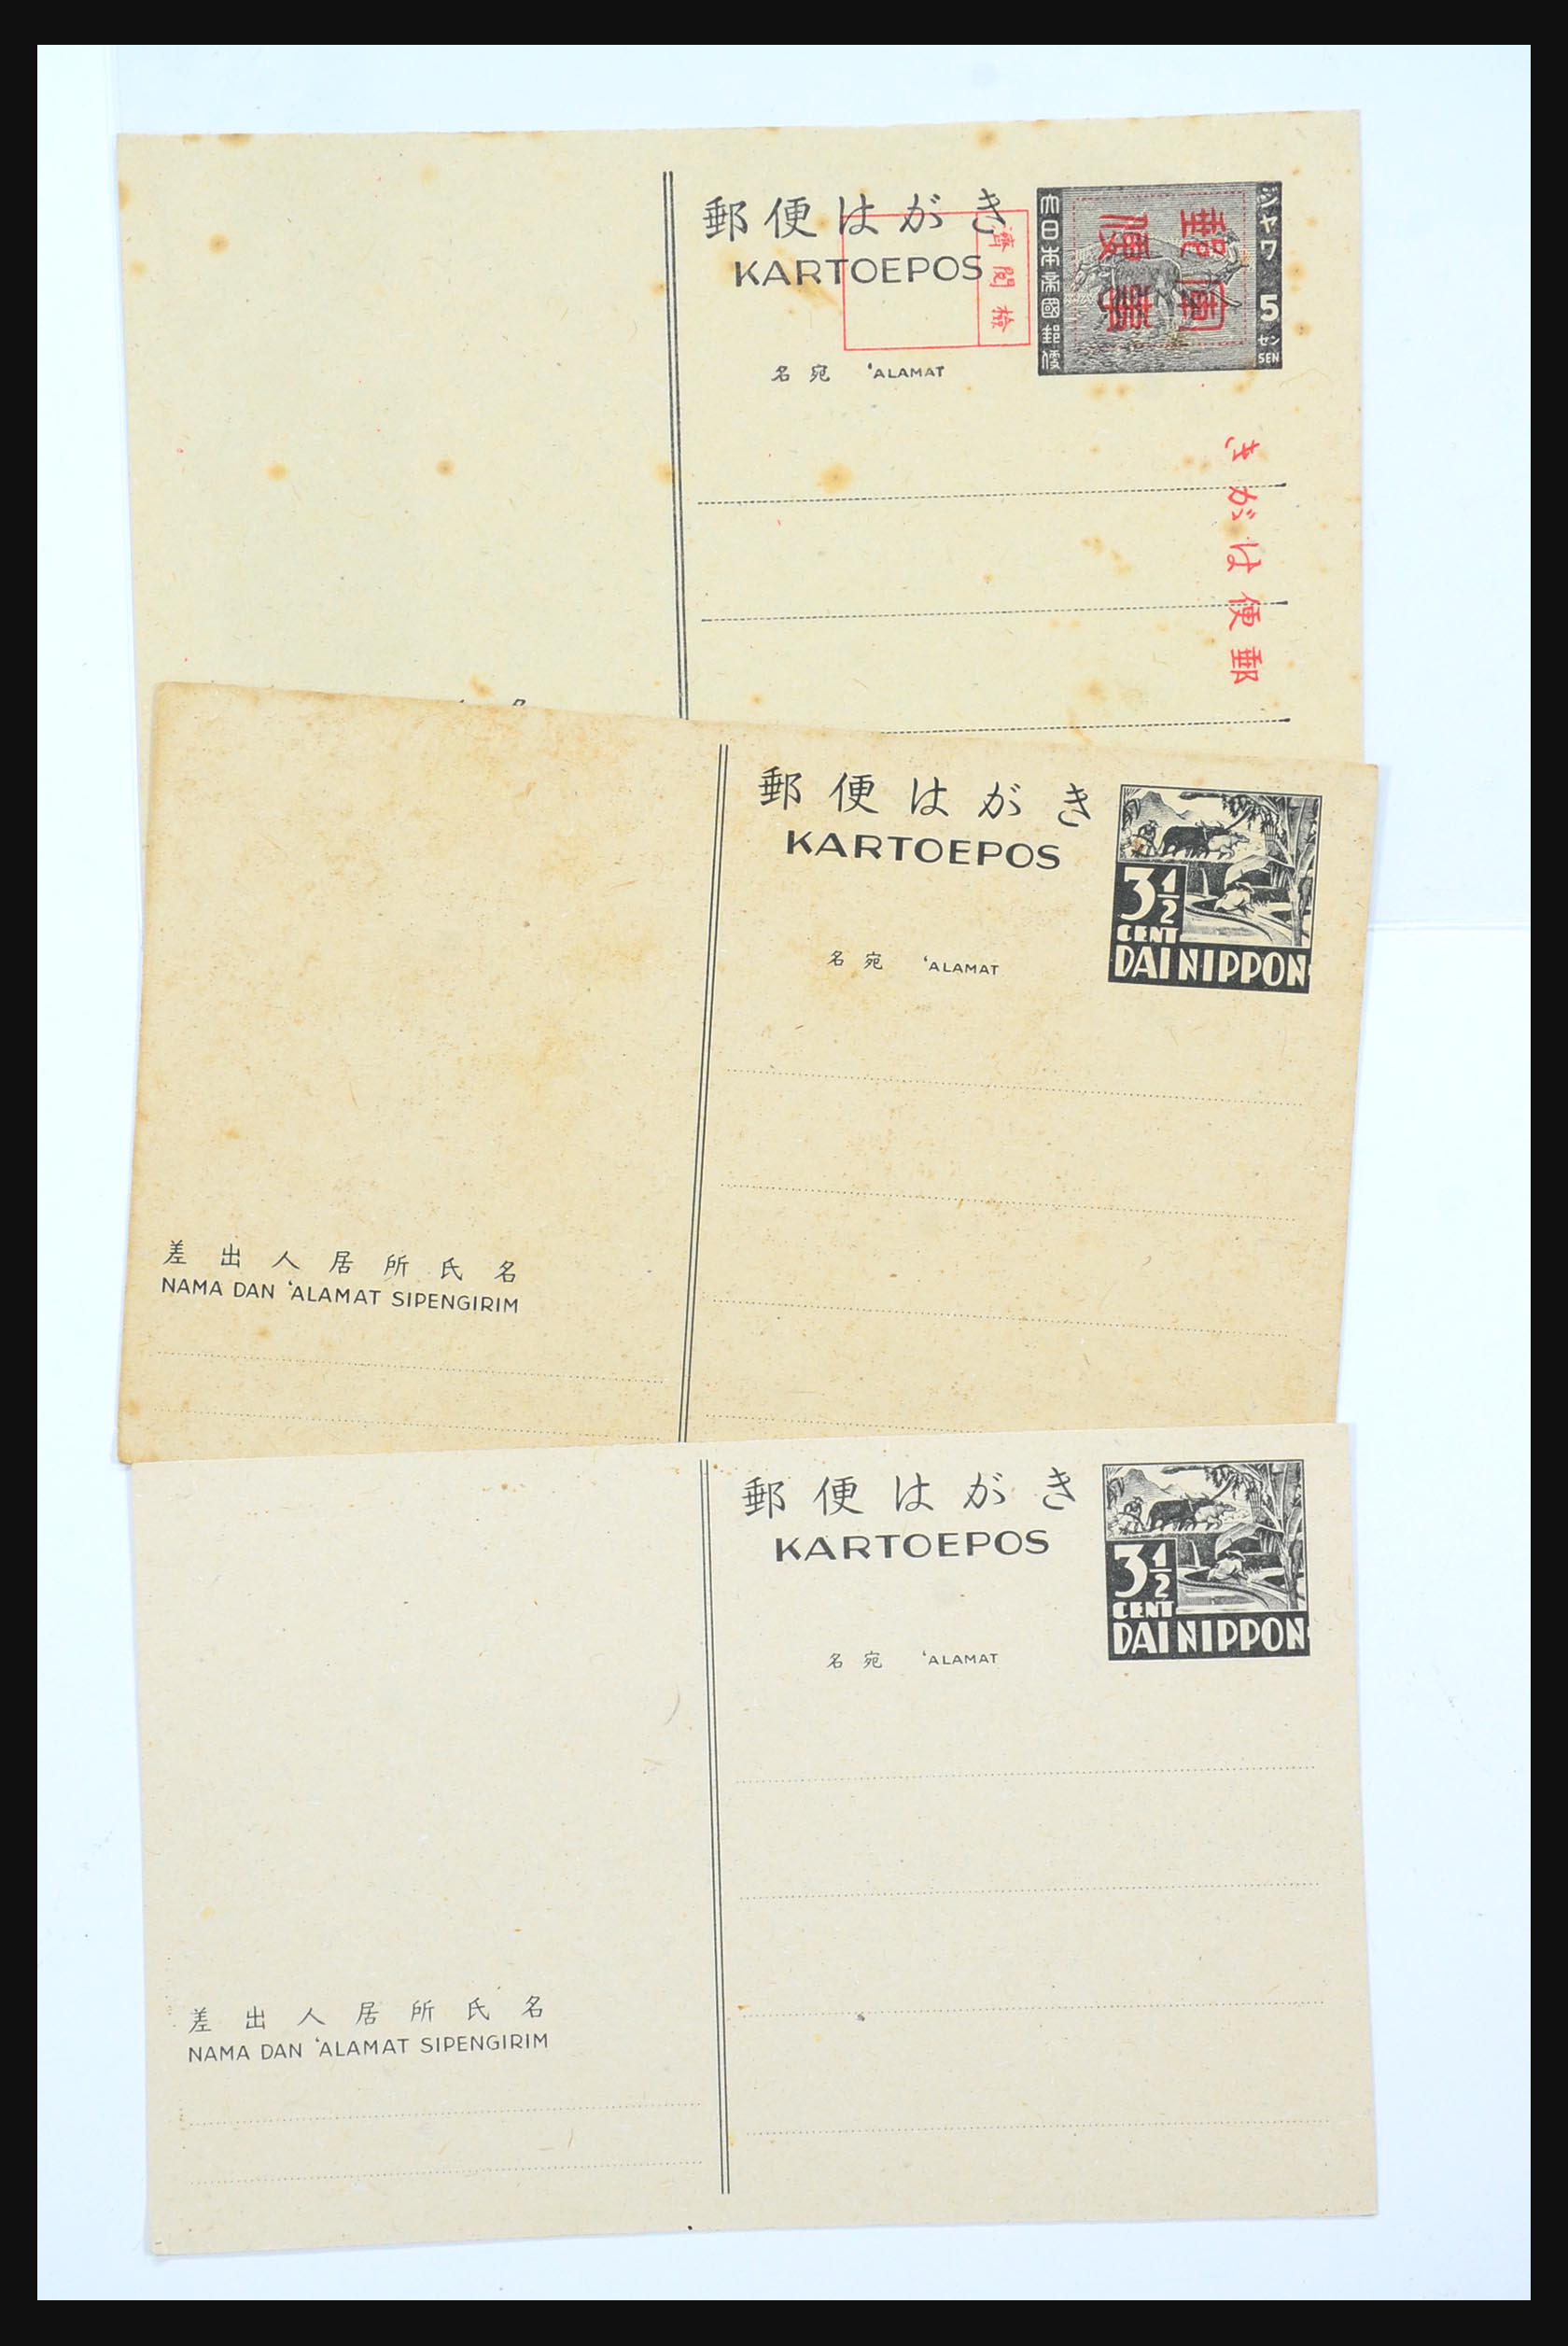 31362 069 - 31362 Netherlands Indies Japanese occupation covers 1942-1945.